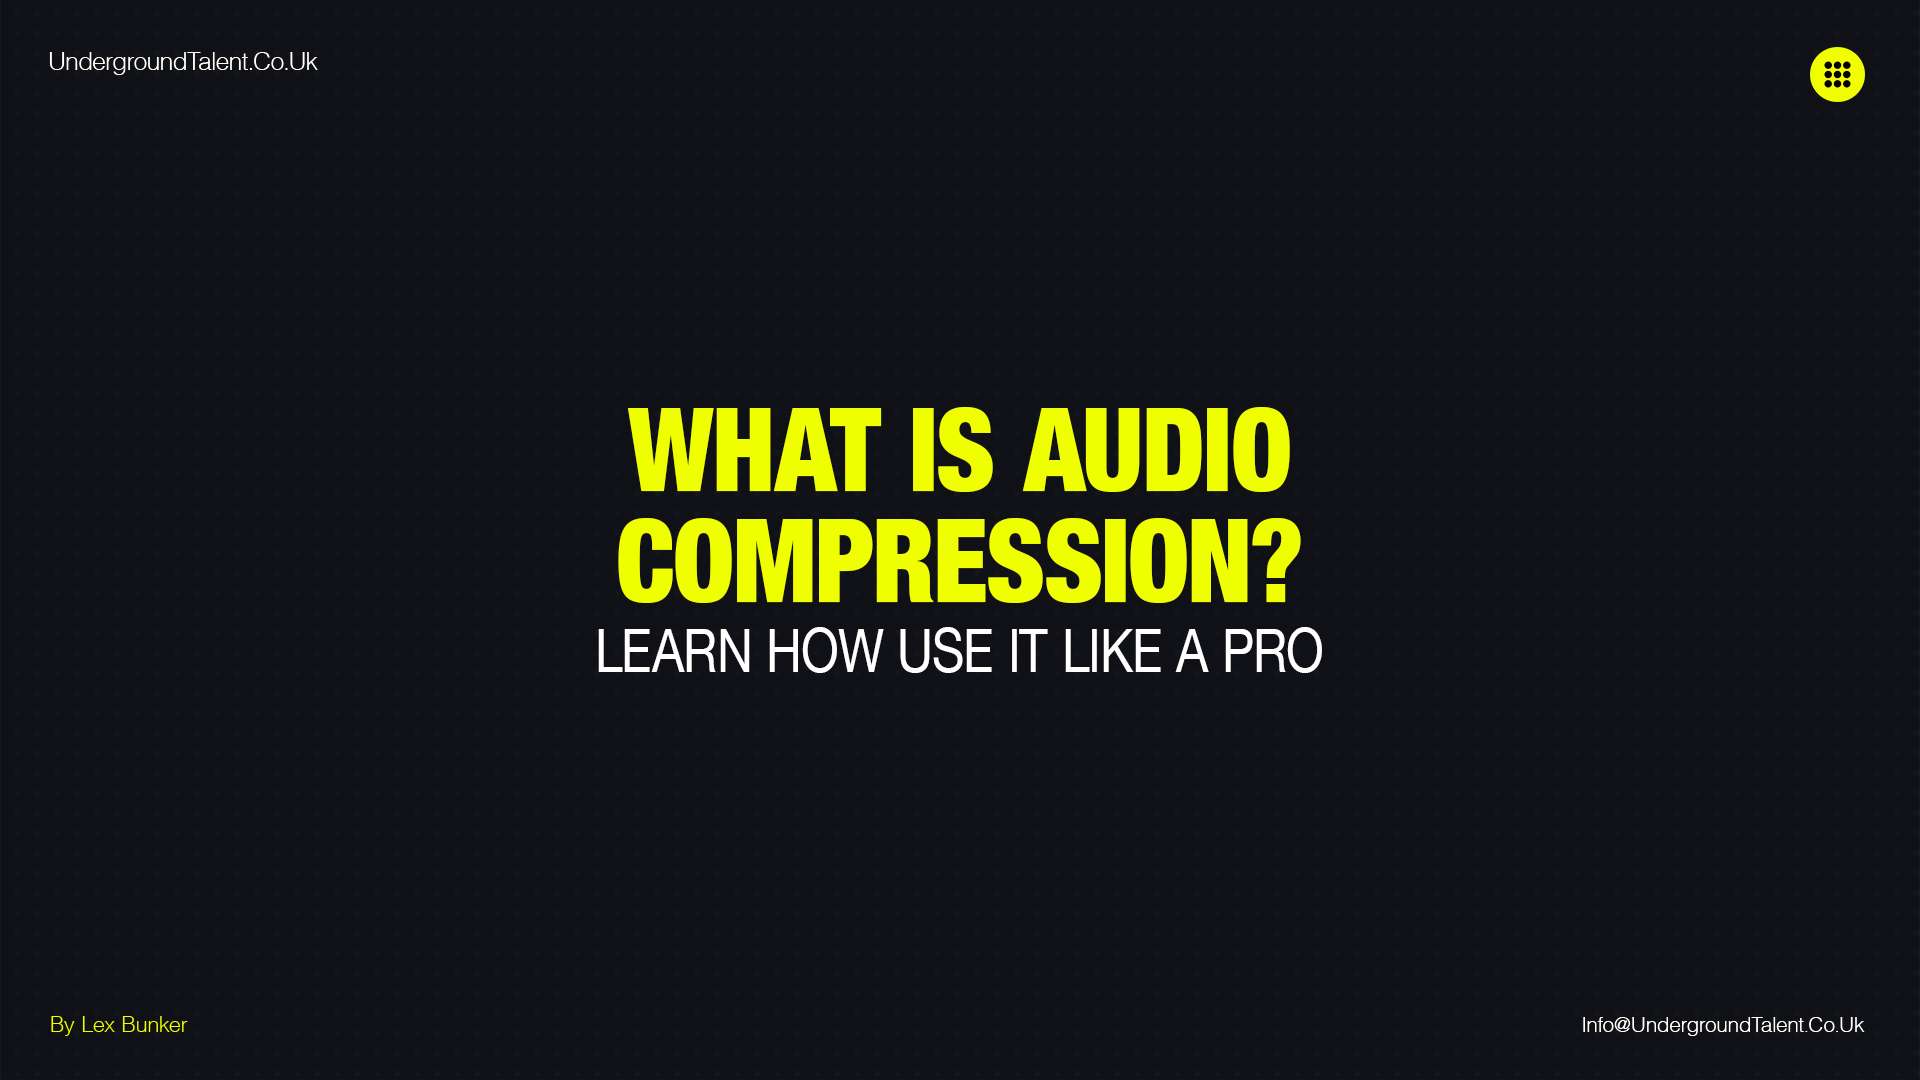 What Is Audio Compression? Learn How to Use It Like A Pro.